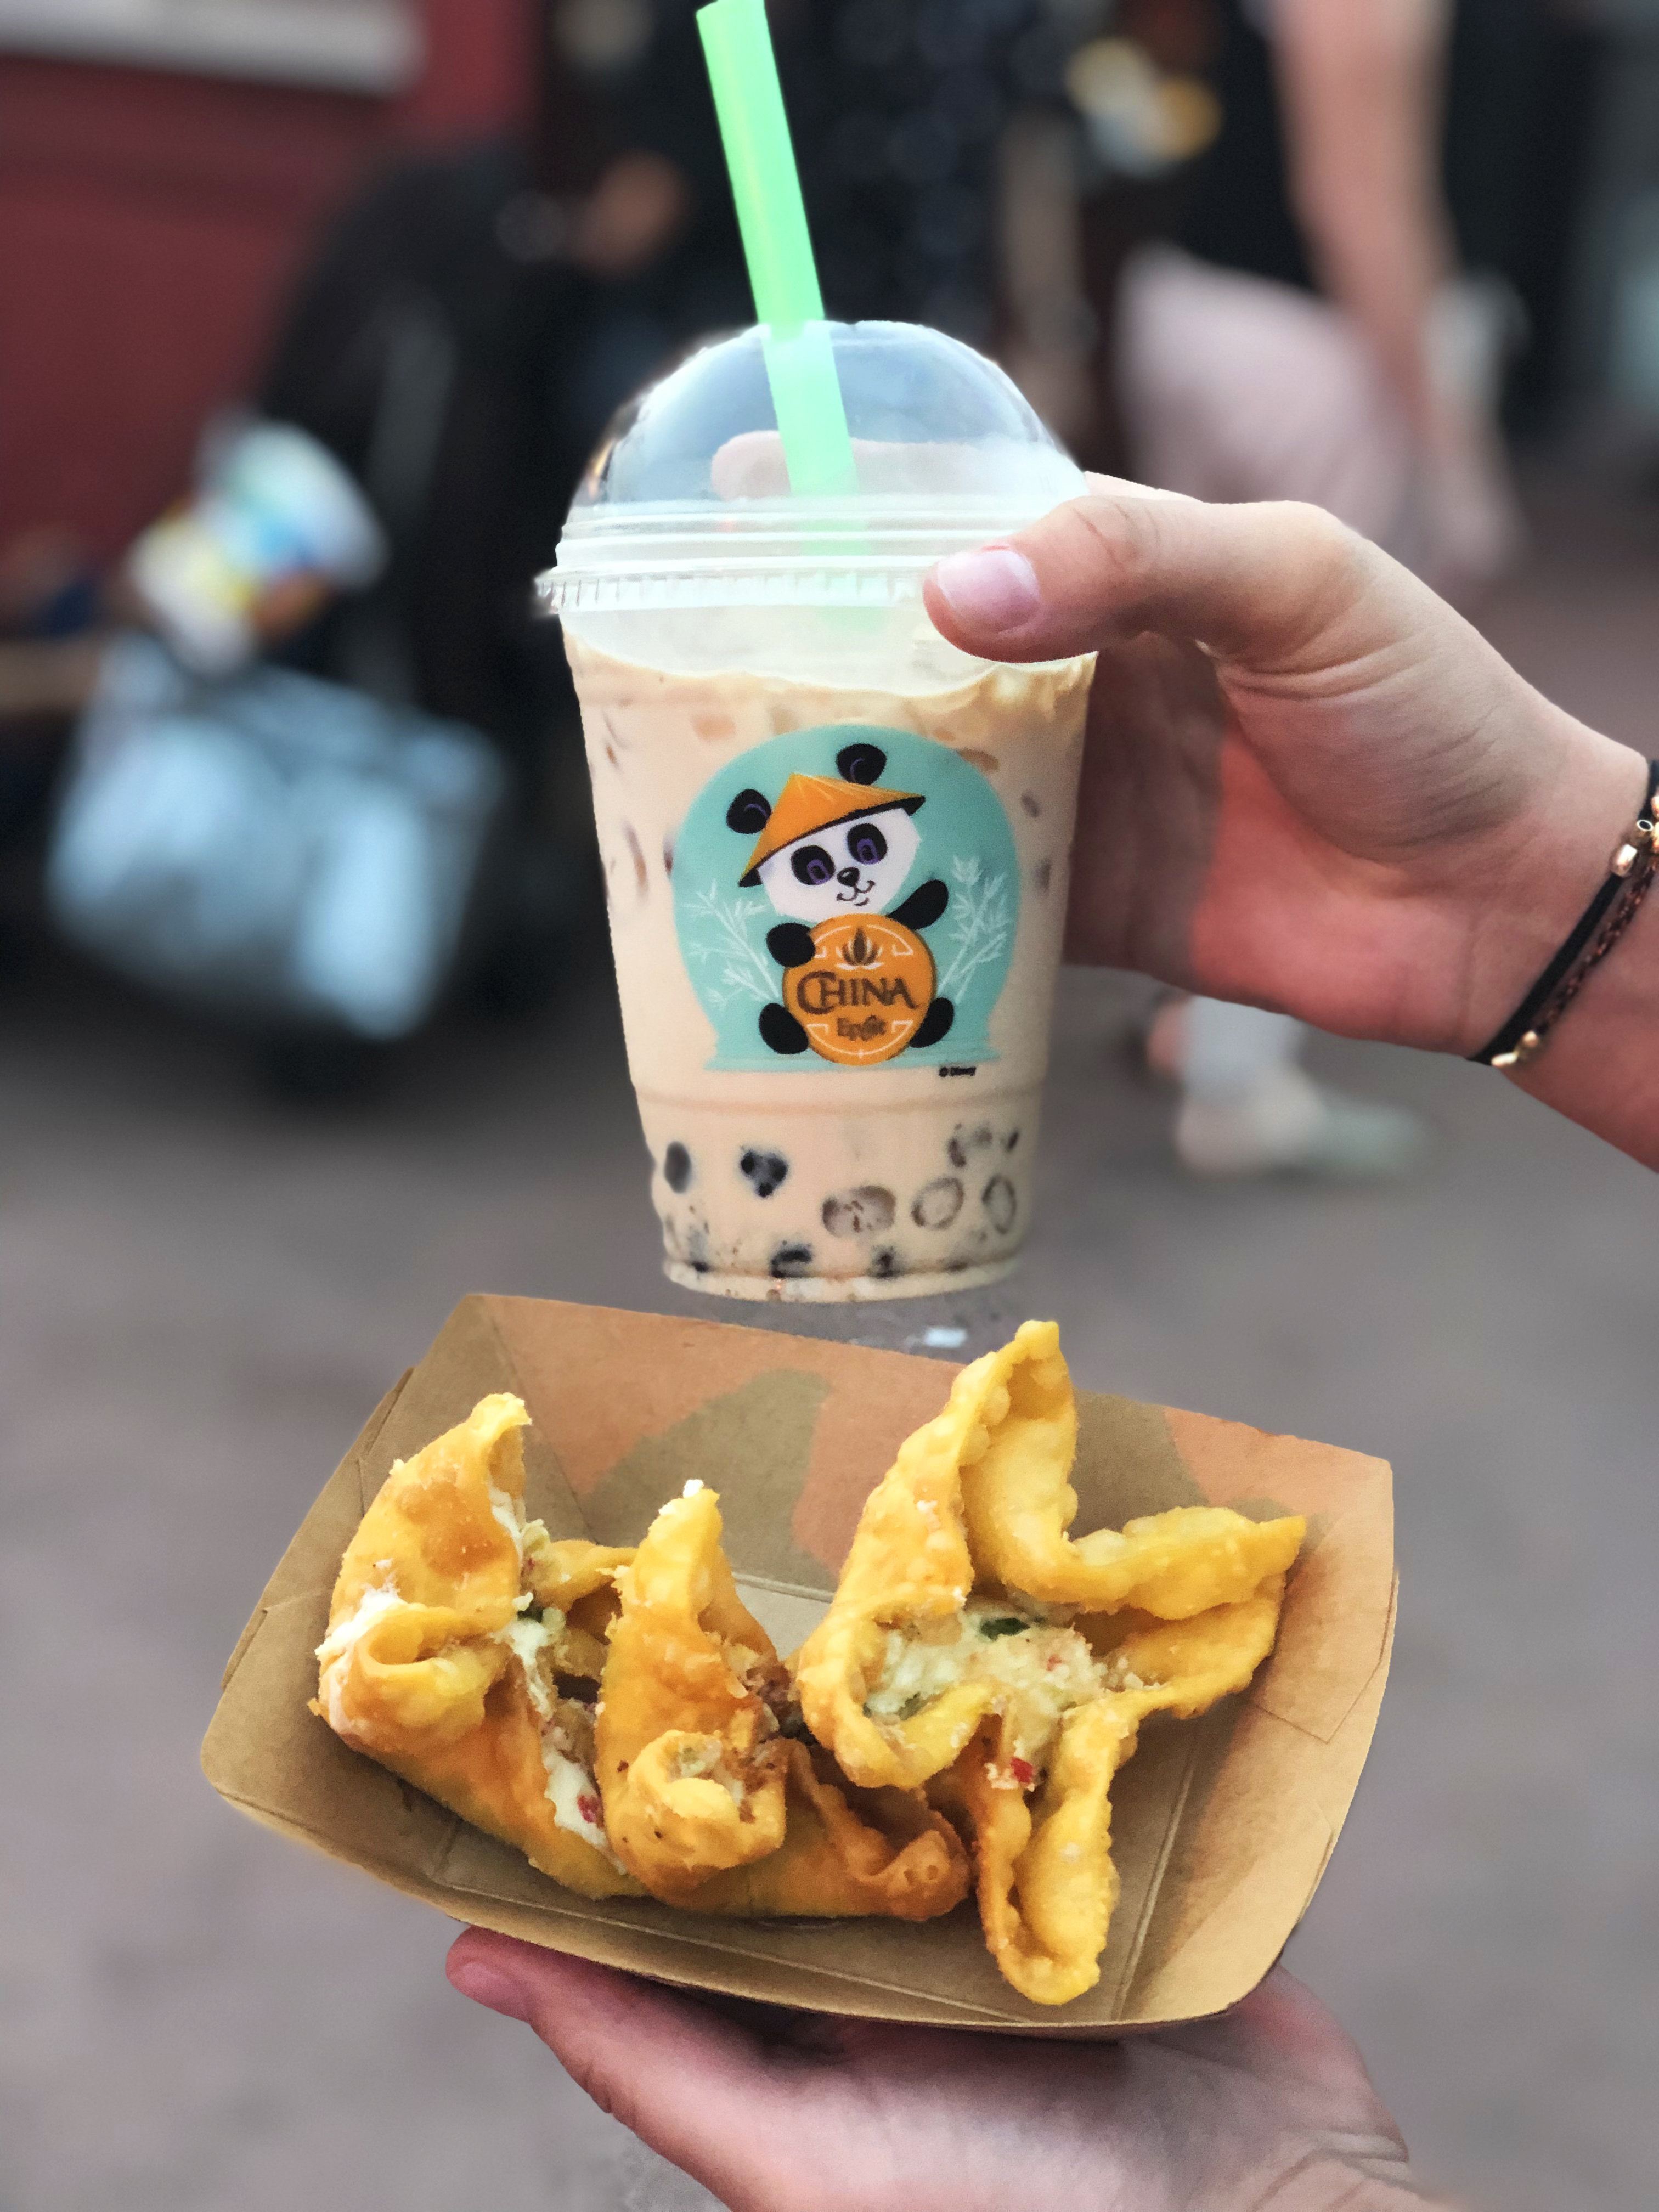 Photo of girls hands holding a cream-colored beverage with boba, a green straw and a panda on the cup (right hand), and a food boat of two stuffed wontons (left hand) during the daytime.